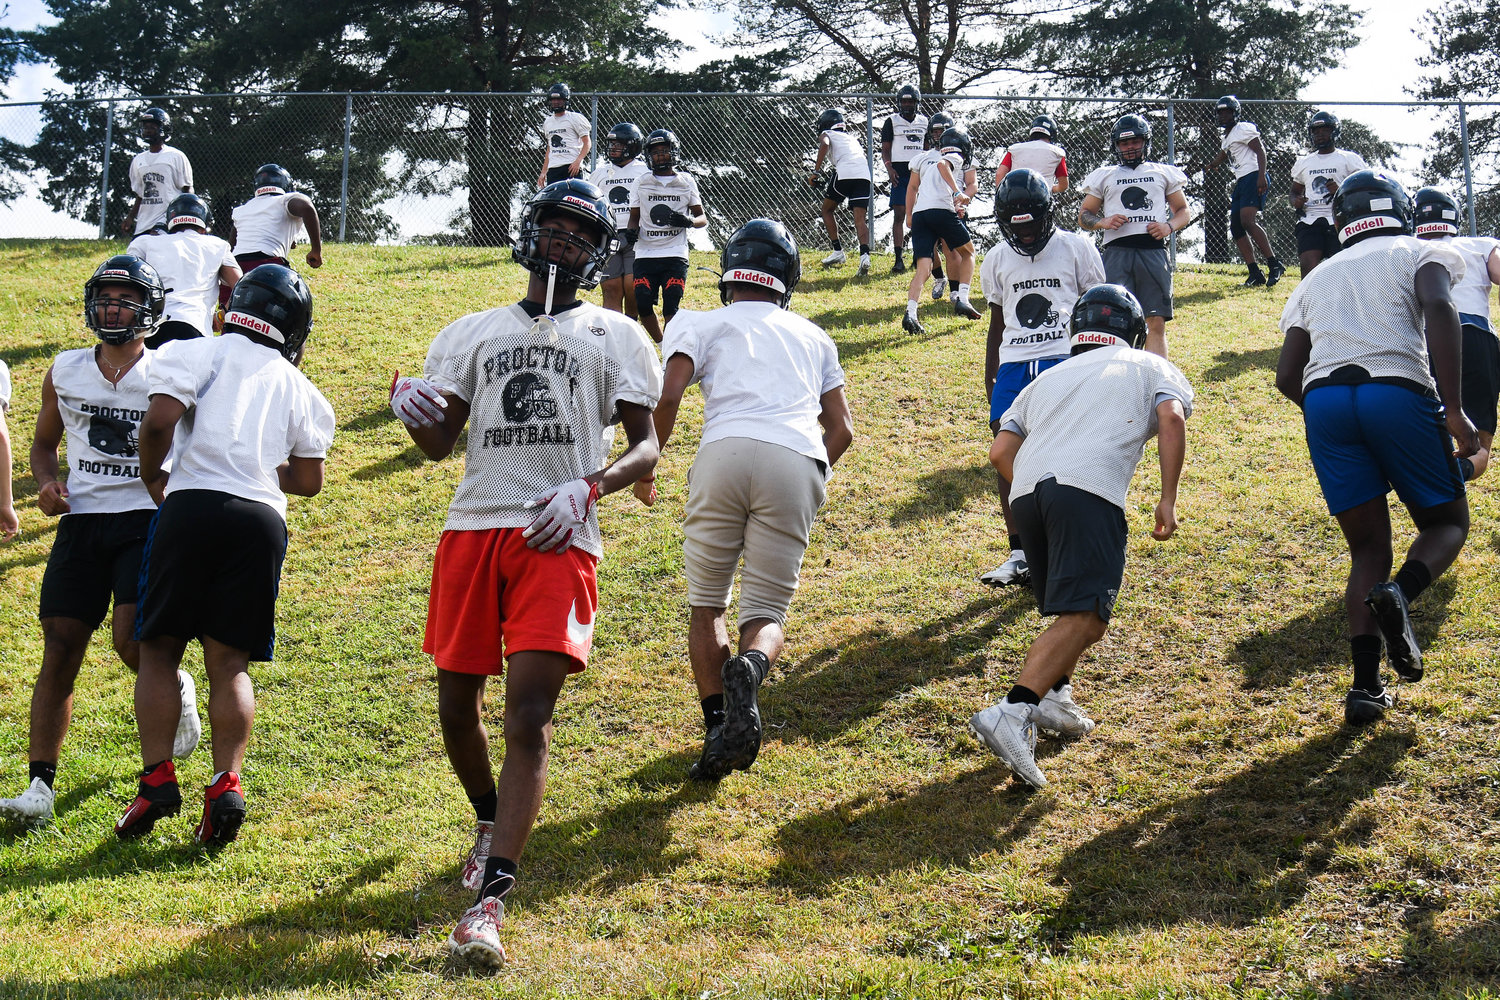 Thomas R. Proctor football players run sprints up and down a hill during practice on Monday D'Alessandro Stadium in Utica. The Raiders finished 4-4 as members of Class A last fall. The team is set open the season Friday, Sept. 9 at Christian Brothers Academy in Syracuse.